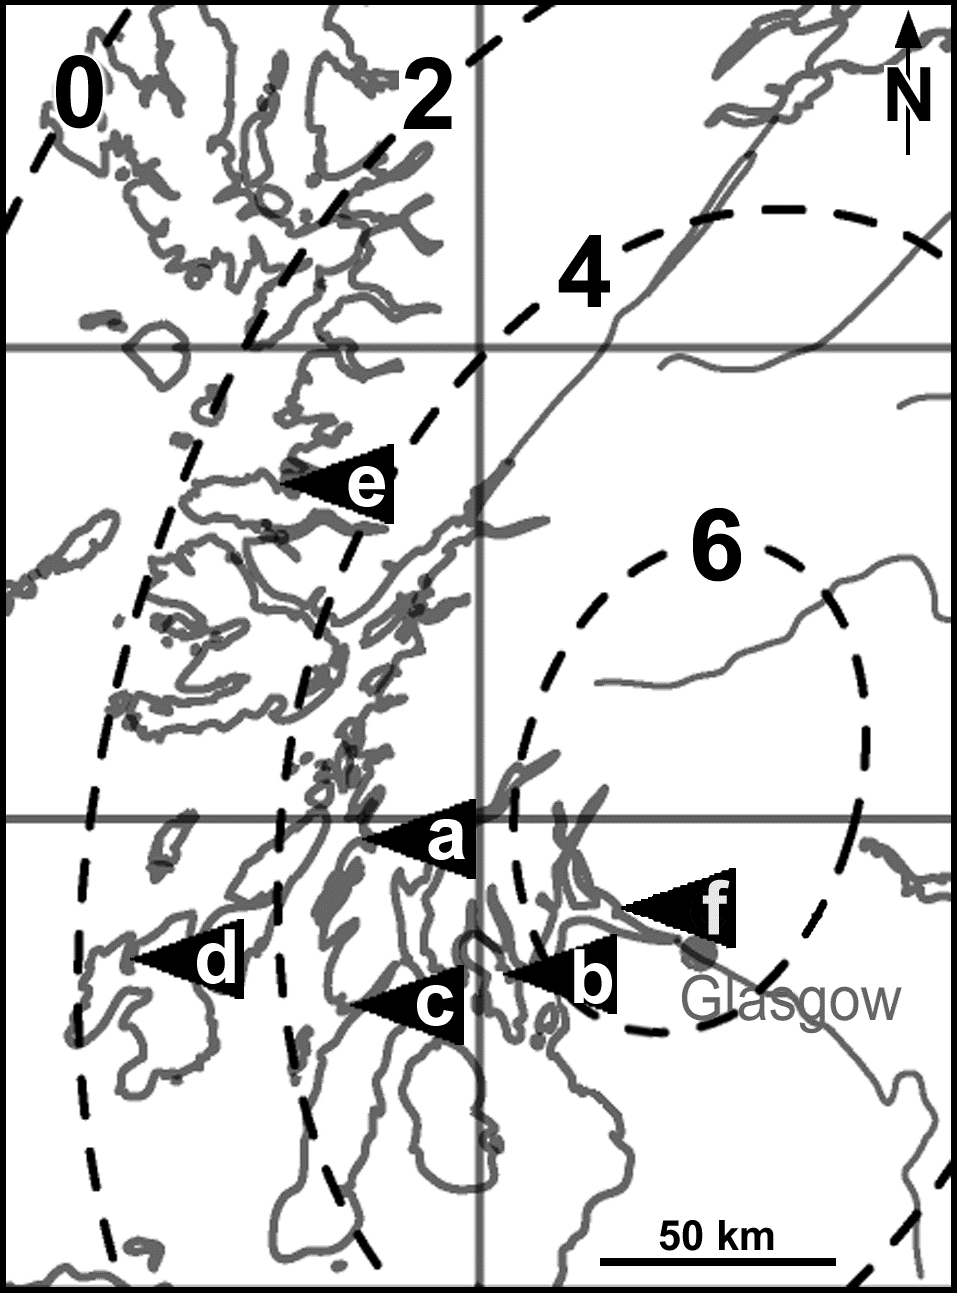 Plate 2. Post-glacial isostatic uplift in South-West Scotland since the Wigtown Shoreline, from the Gaussian quadratic model of Smith et al. (2006).